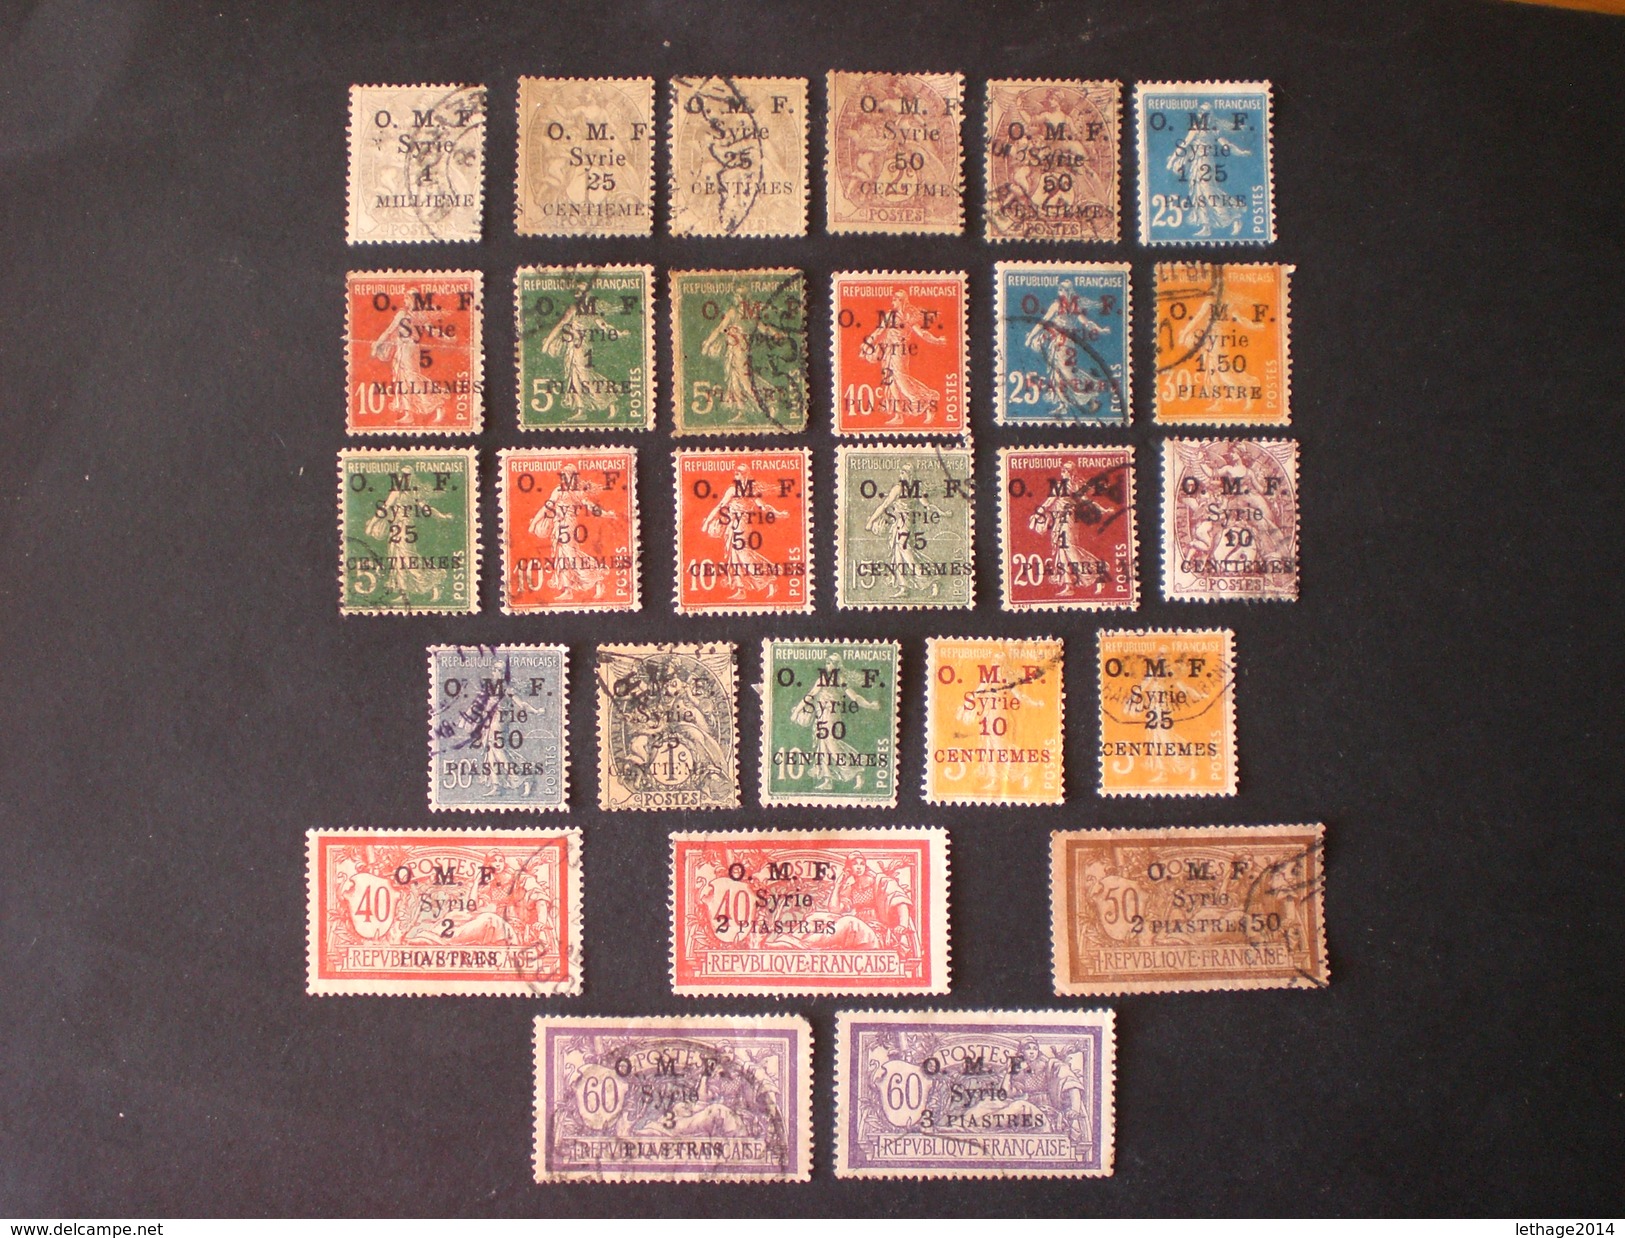 SYRIE SYRIA 1920 French Postage Stamps Surcharged & Overprinted "O.M.F. - Syrie" ++ 54 PHOTO - Oblitérés